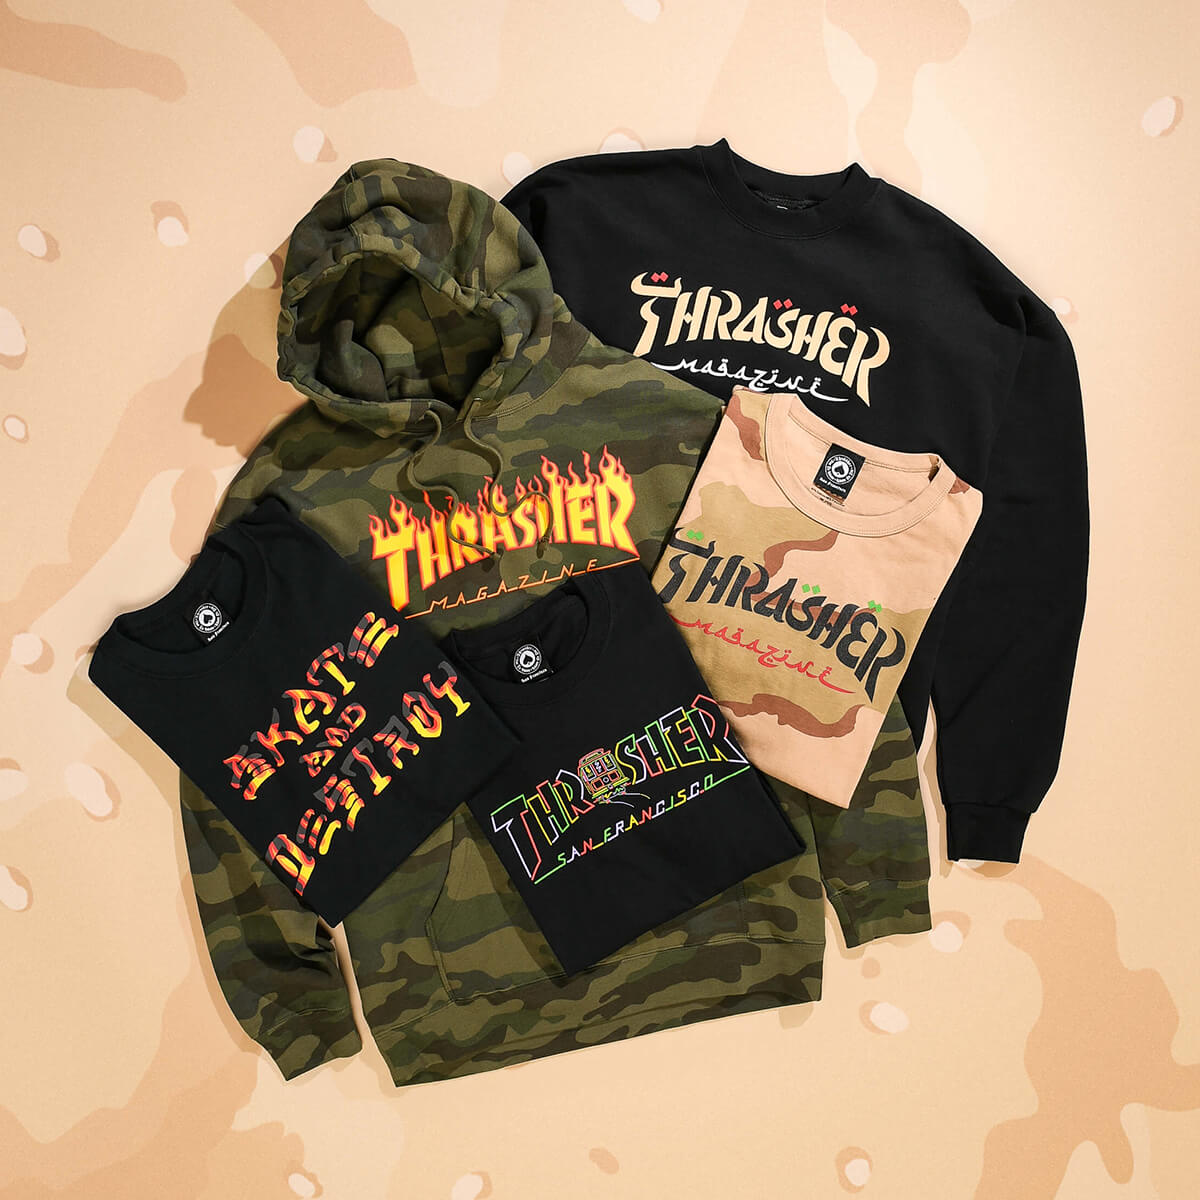 NEW ARRIVALS TEES FROM THRASHER - SHOP NEW THRASHER